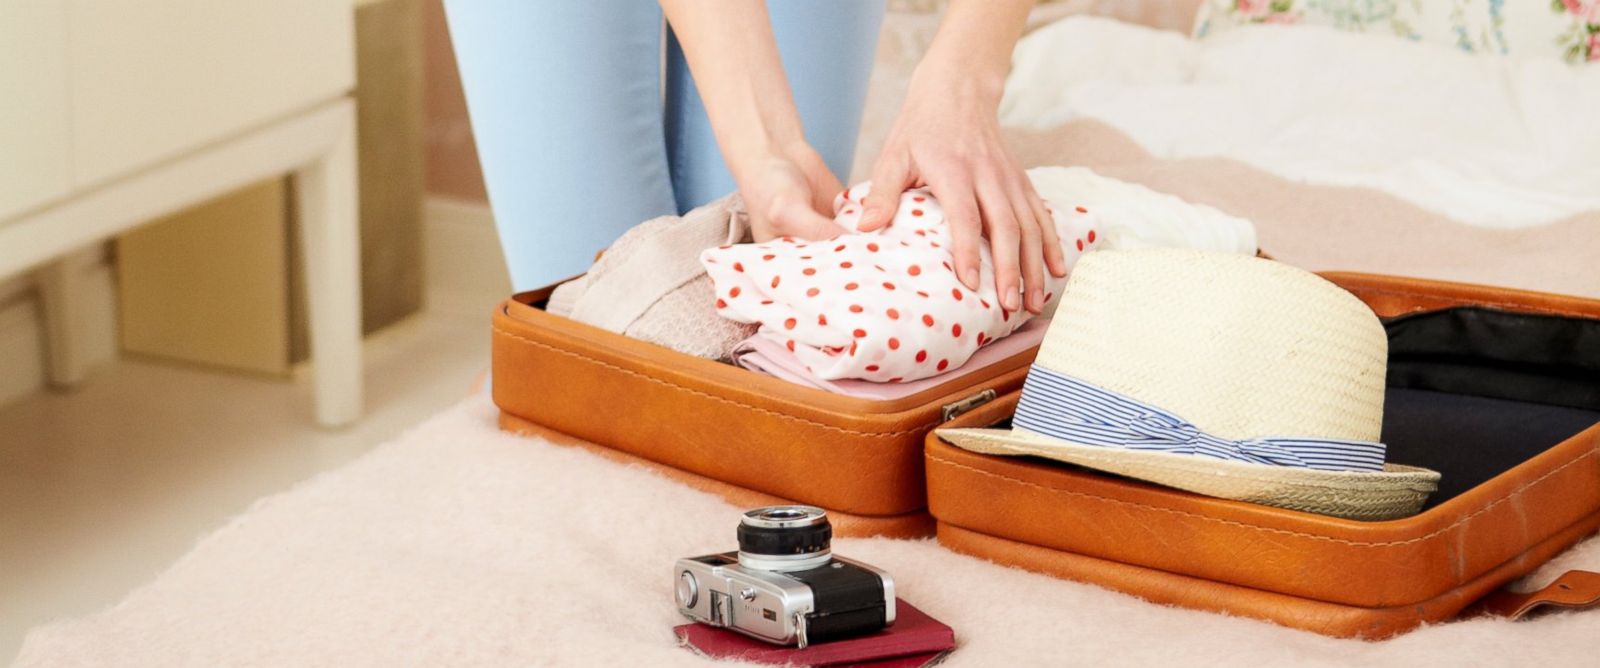 gty_women_packing_suitcase_mm_150619_12x5_1600